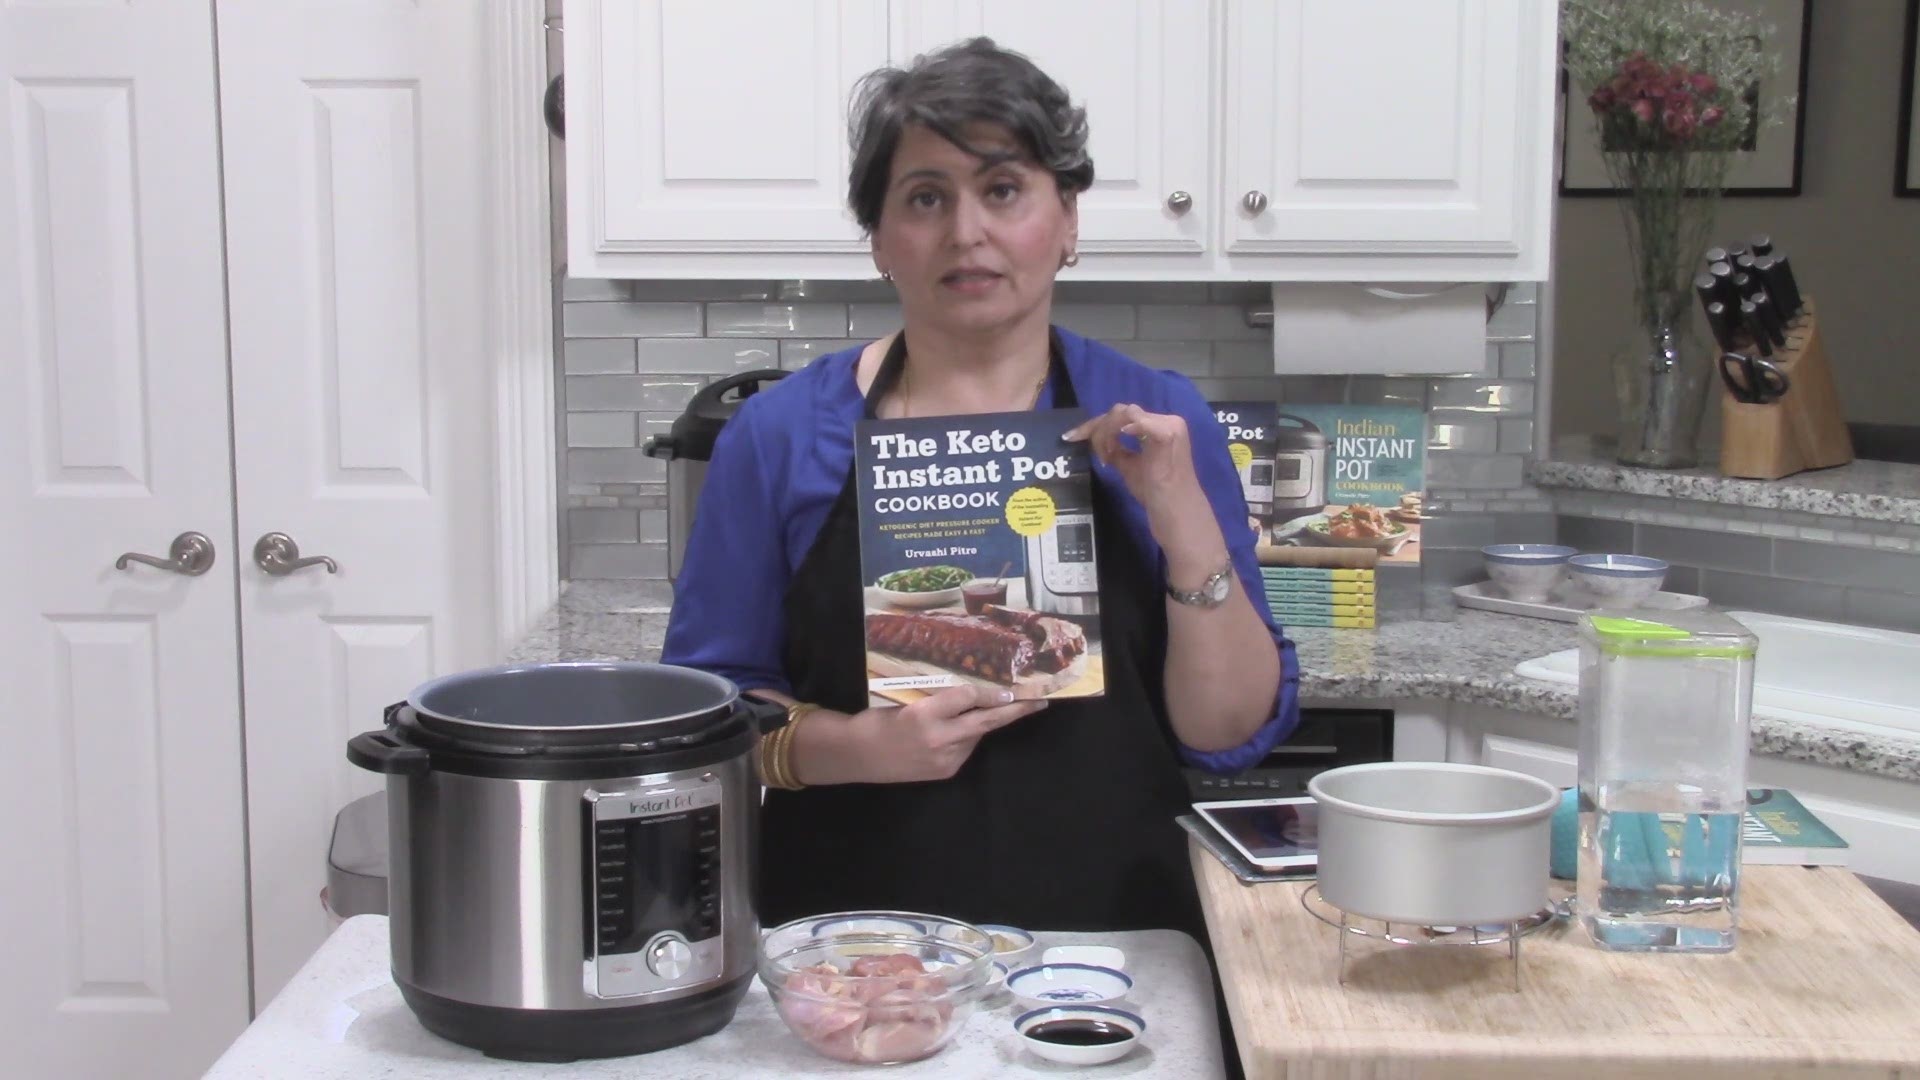 Urvashi Pitre talks about her latest cookbook and demonstrates Instant Pot recipes. Video provided by CURICH WEISS.